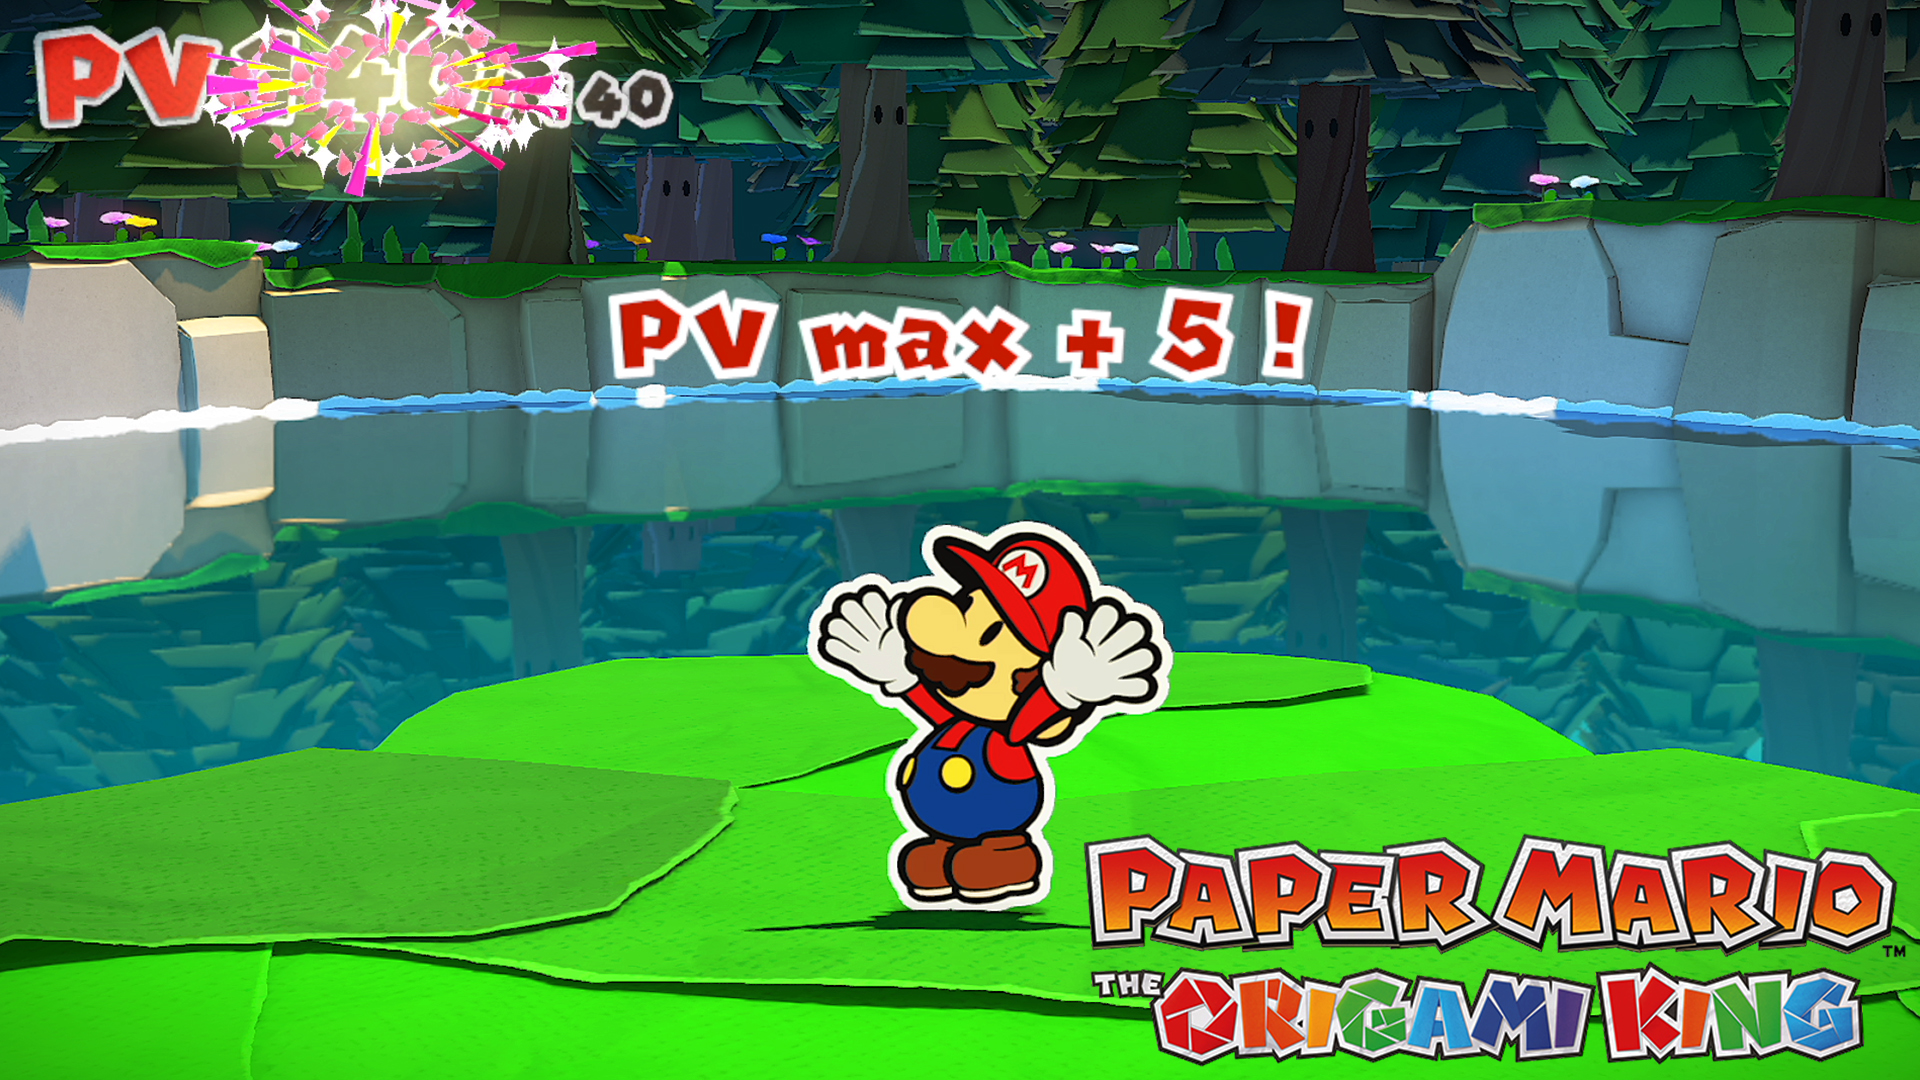 Paper Mario The Origami King max HP hearts, where to find them